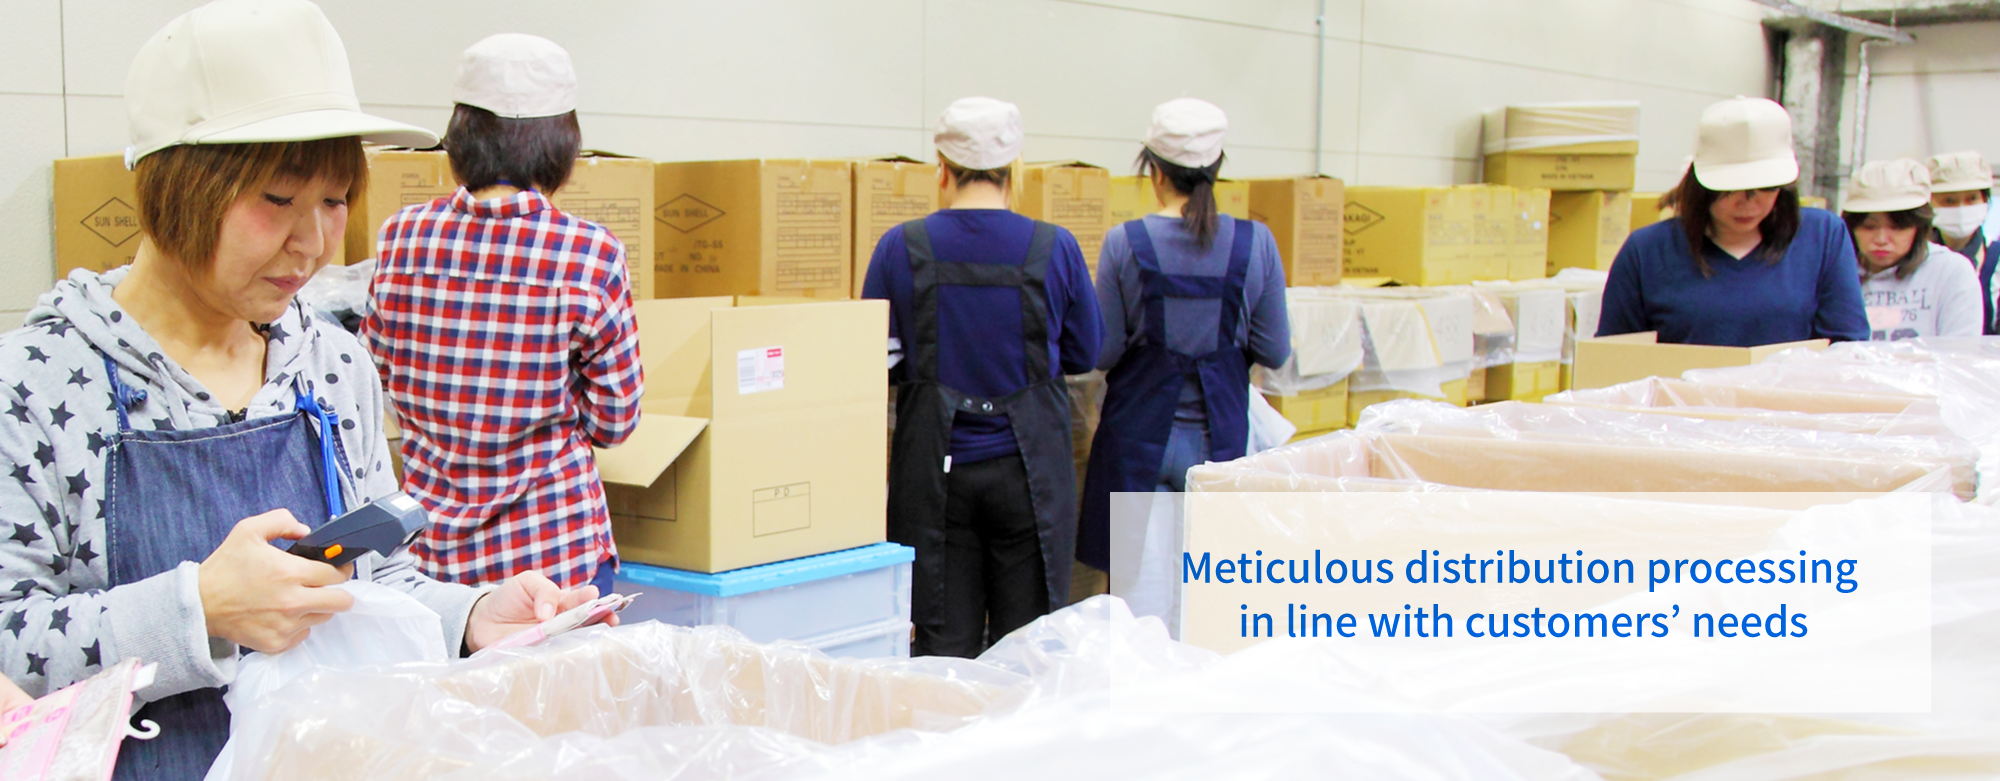 Meticulous distribution processing in line with customers’ needs